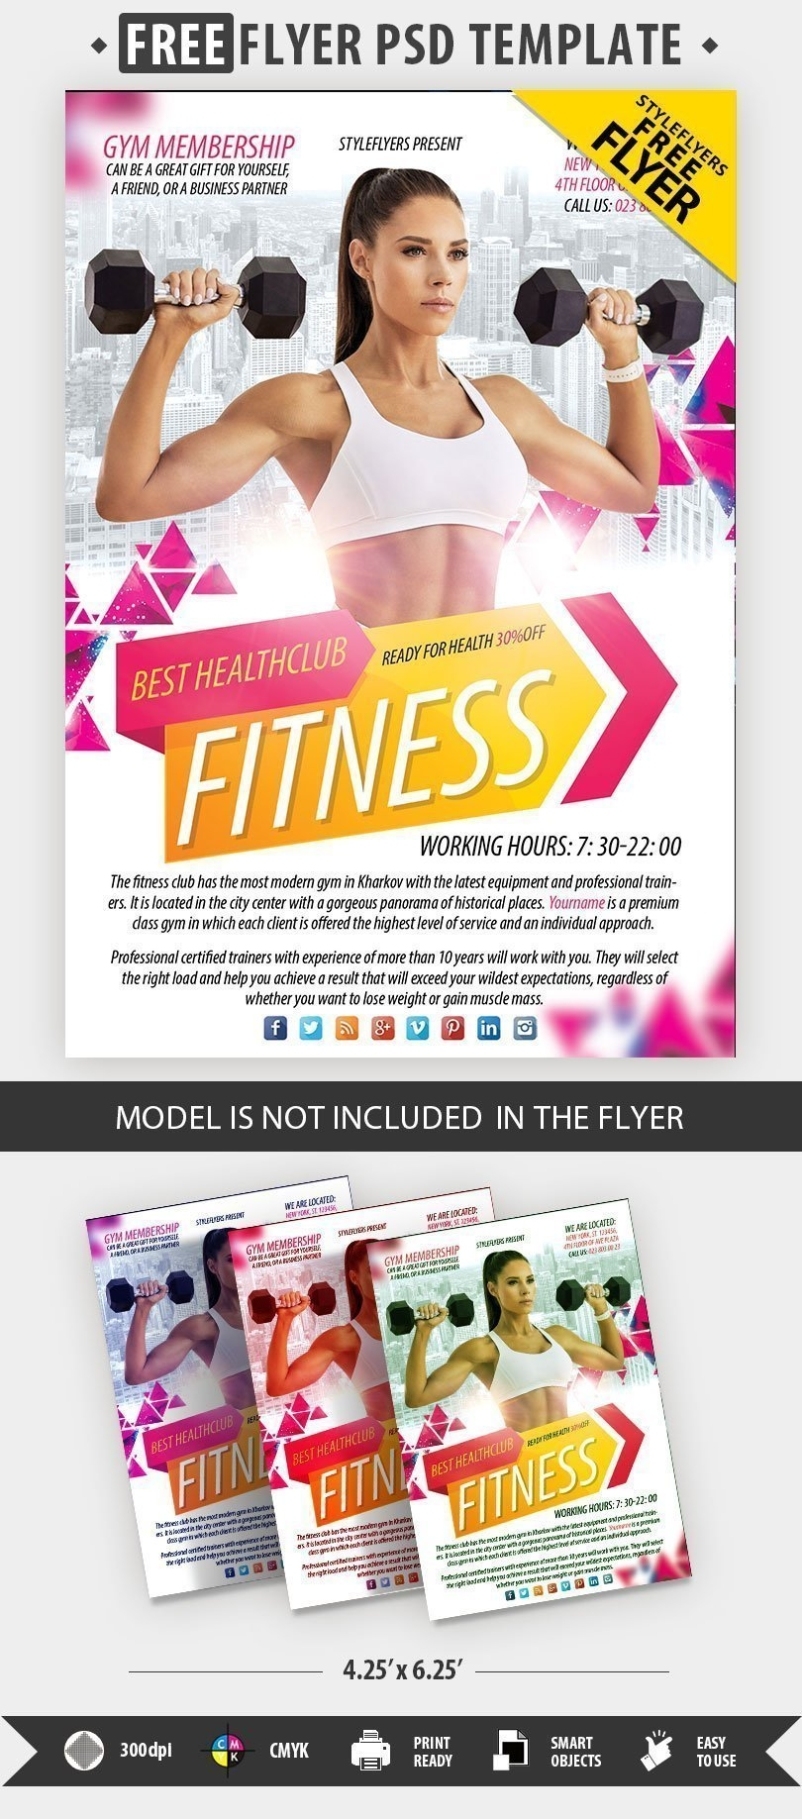 Fitness Flyer Free Psd Flyer Template Free Download #32913 - Styleflyers Pertaining To Flyer Design Templates Psd Free Download